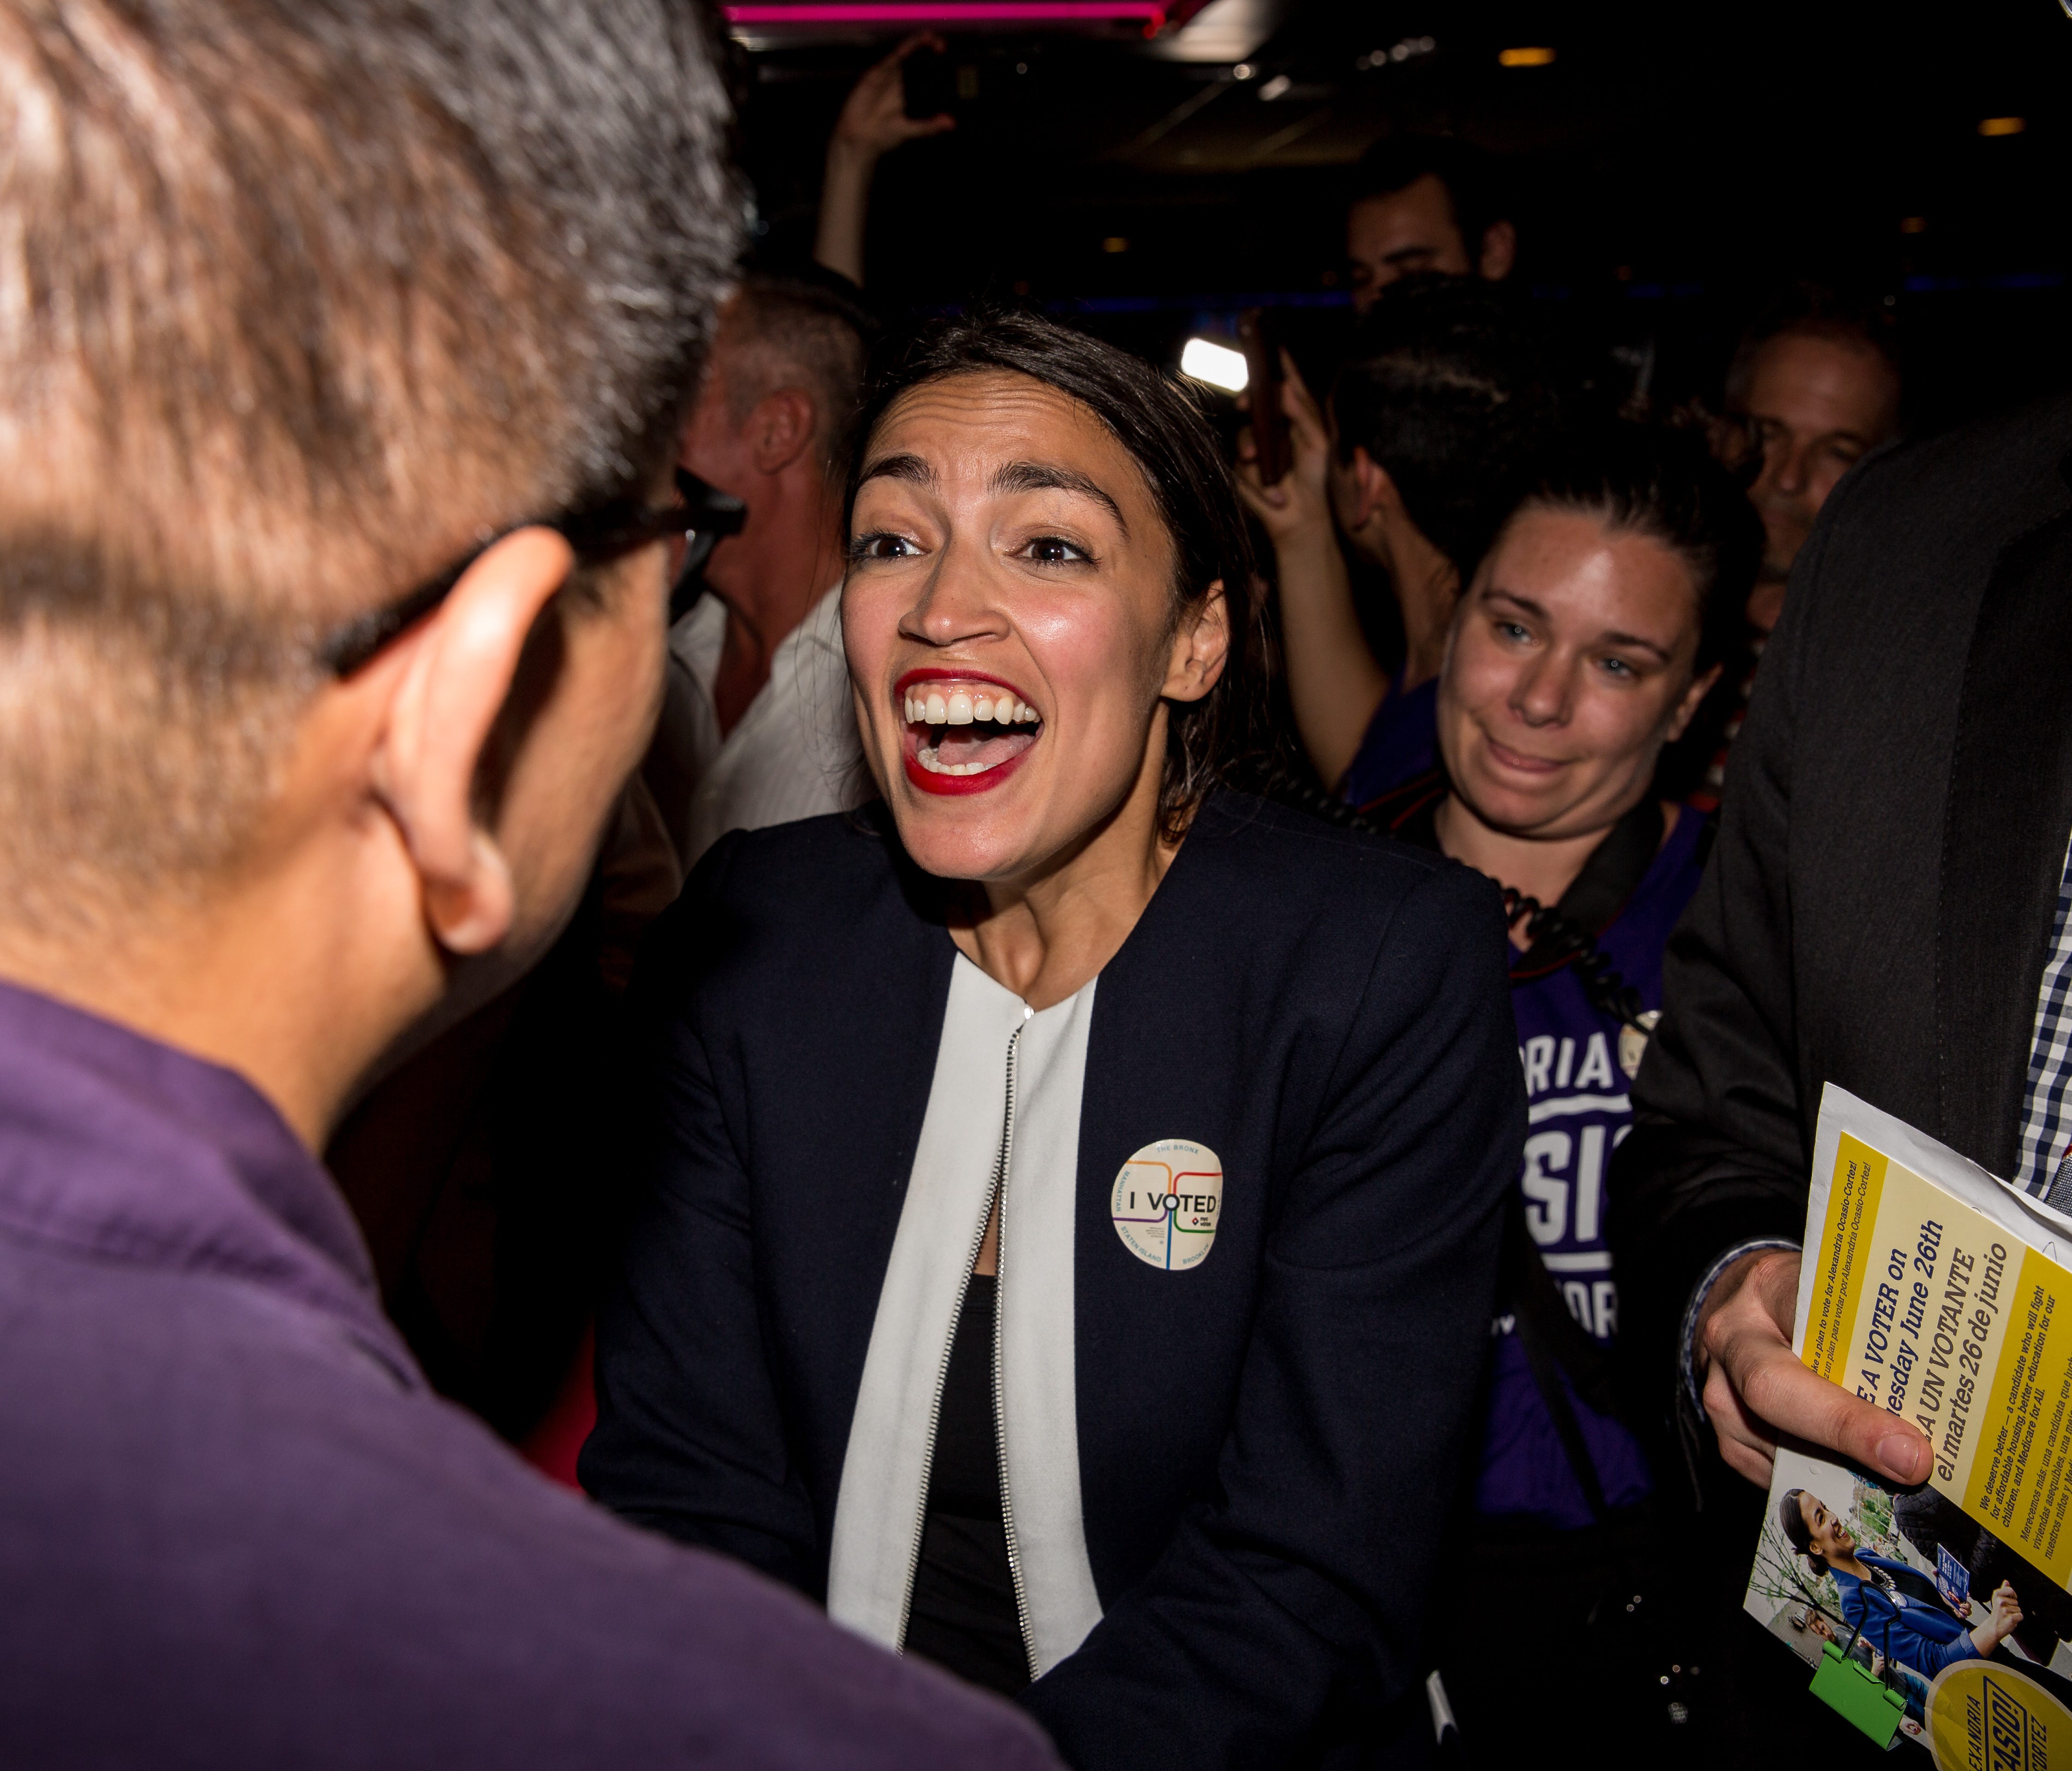 Progressive challenger Alexandria Ocasio-Cortez celebrartes with supporters at a victory party in the Bronx after upsetting incumbent Democratic Representative Joseph Crowly on June 26, 2018 in New York City.  Ocasio-Cortez upset Rep. Joseph Crowley 